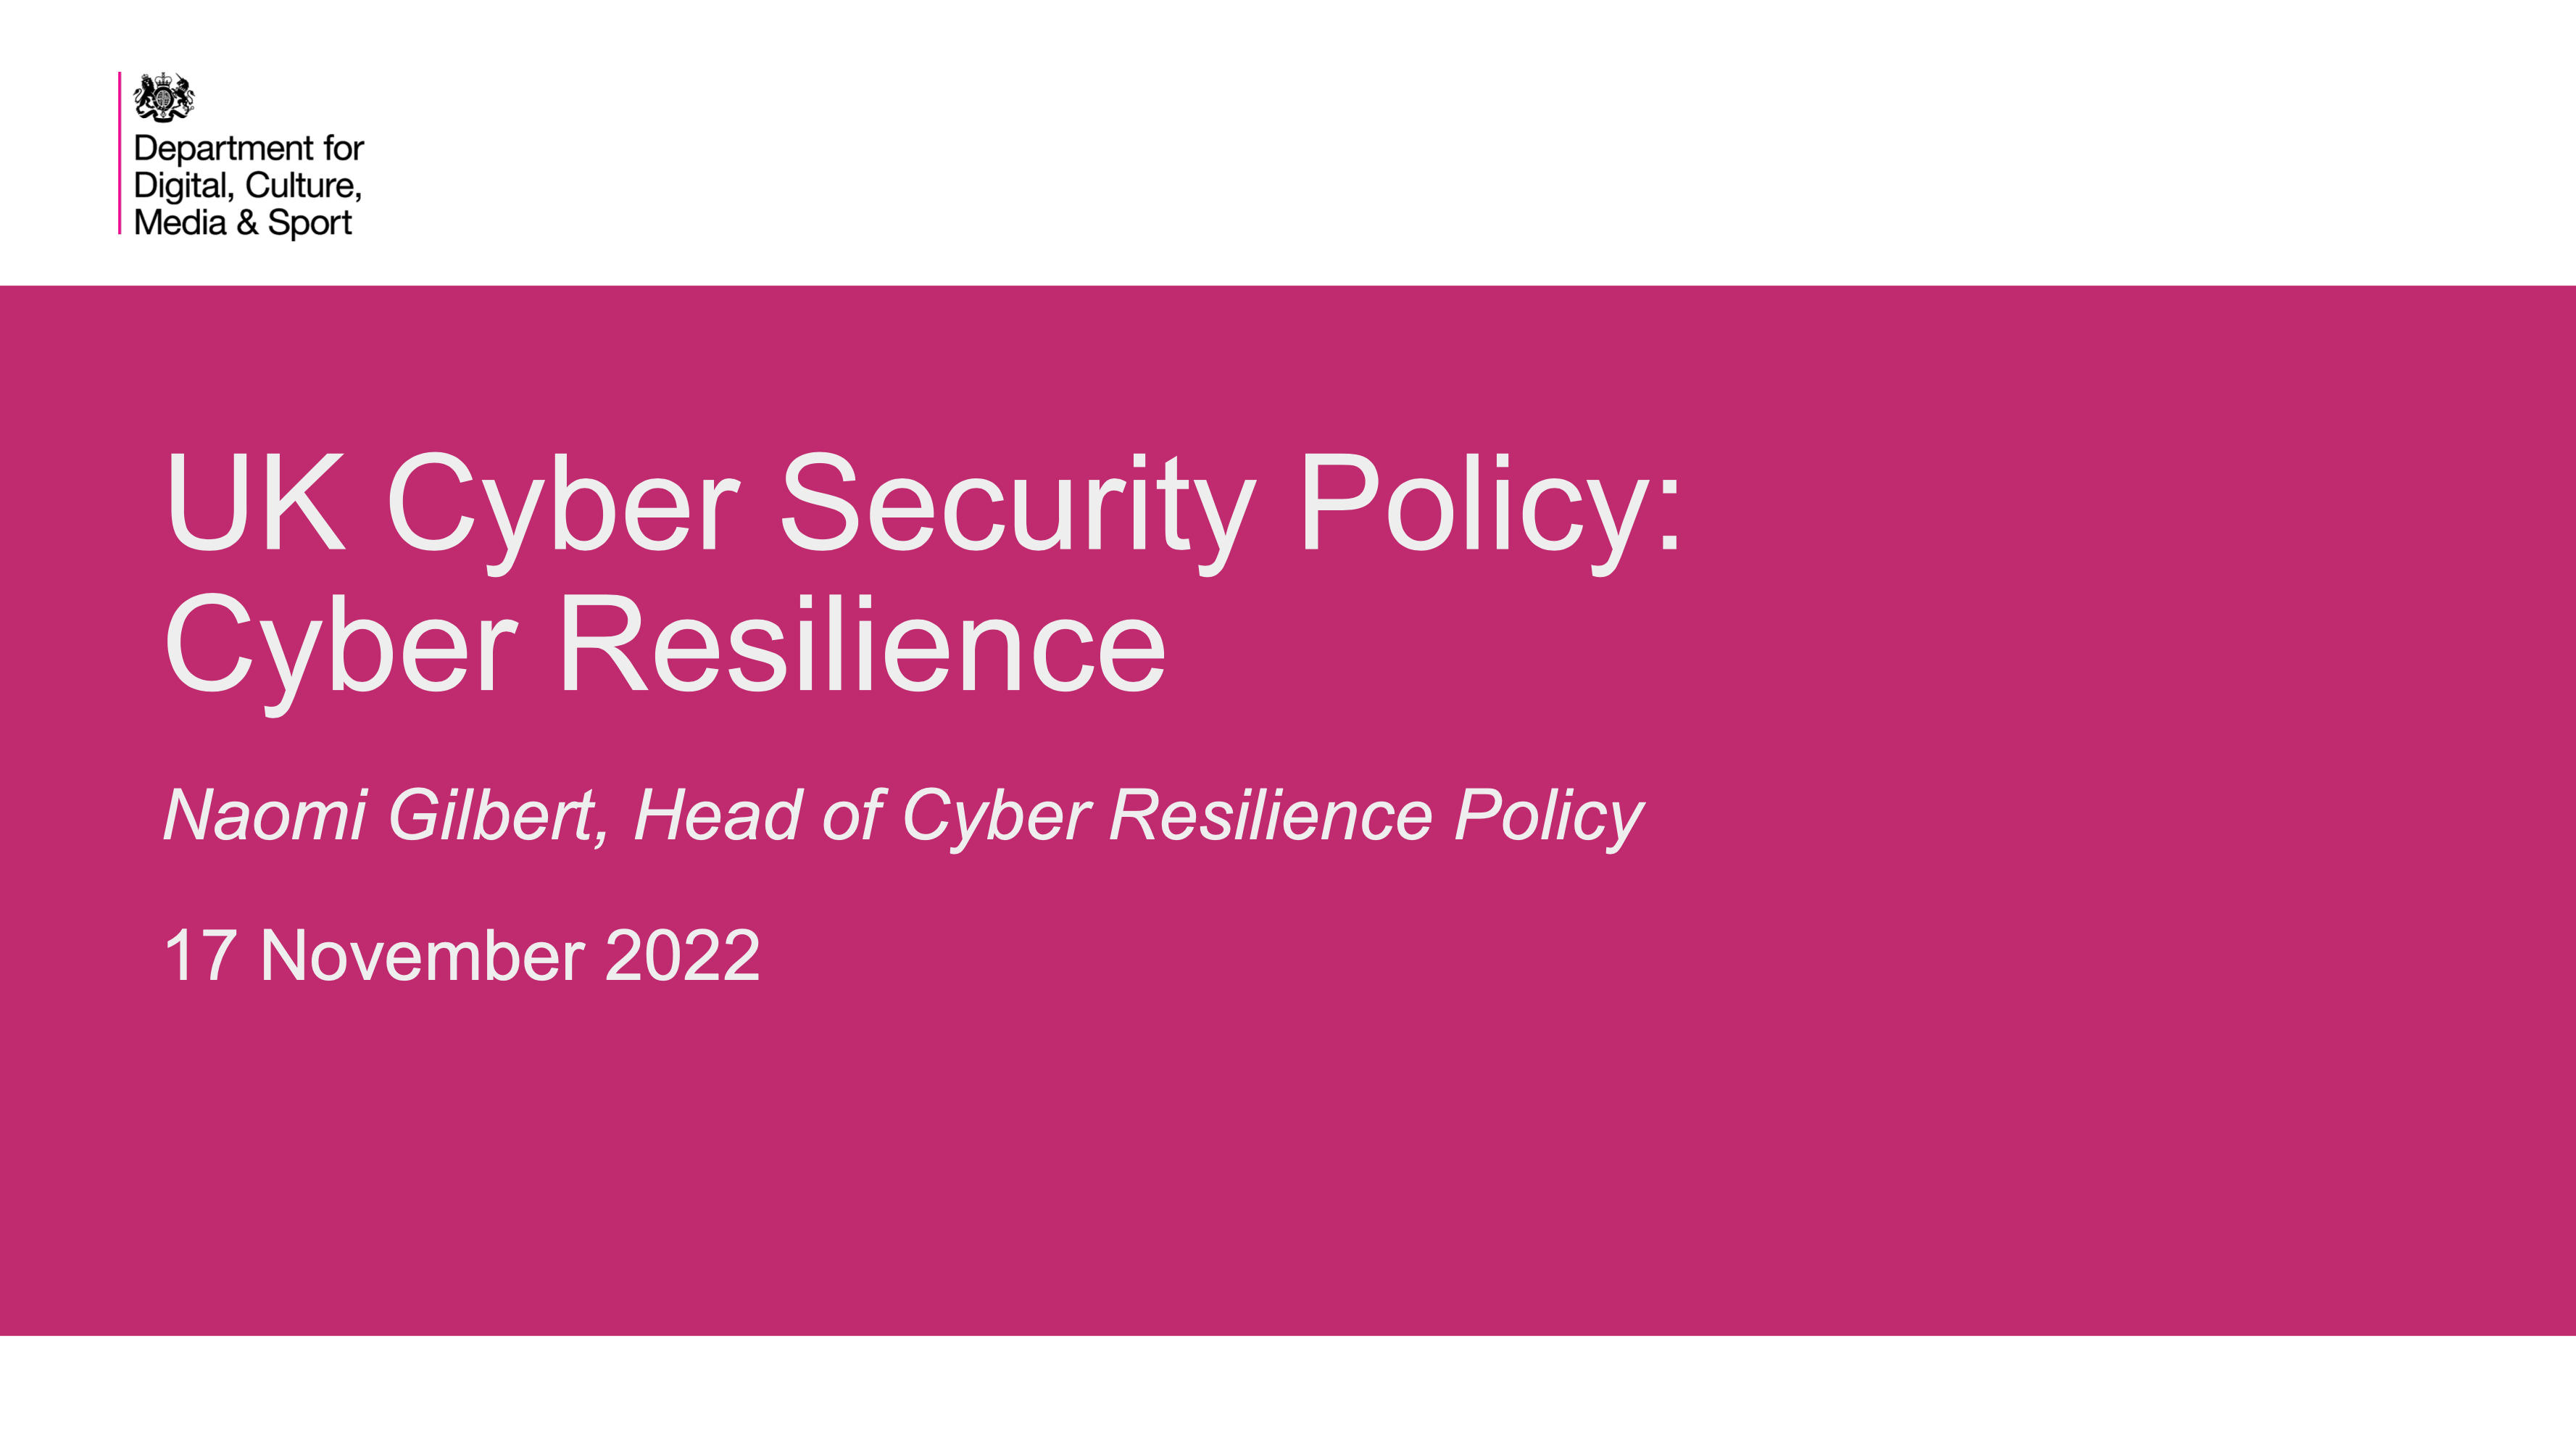 UK CYBER SECURITY POLICY: CYBER RESILIENCE - NAOMI GILBERT